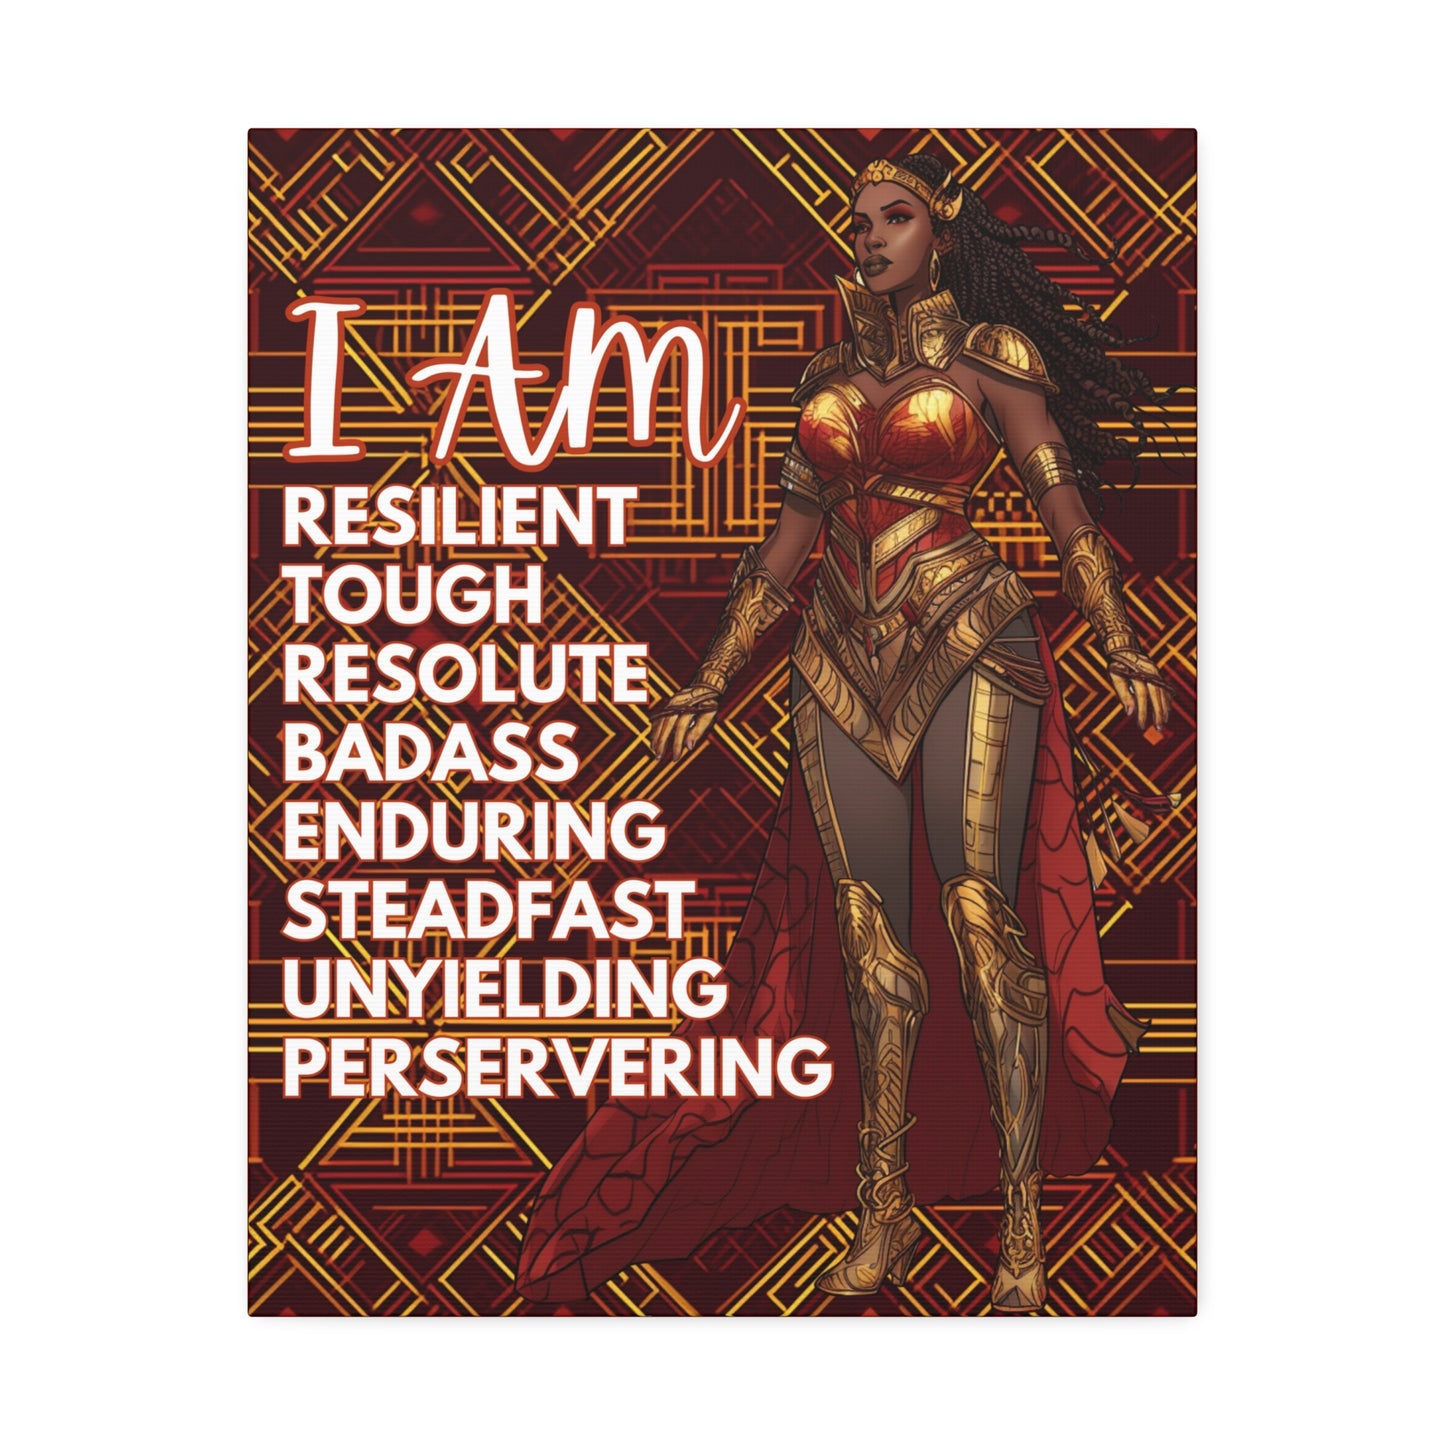 “Resilient” BADASS WARRIOR WOMAN | Canvas Stretched, 1.5 | Affirmations Accessories